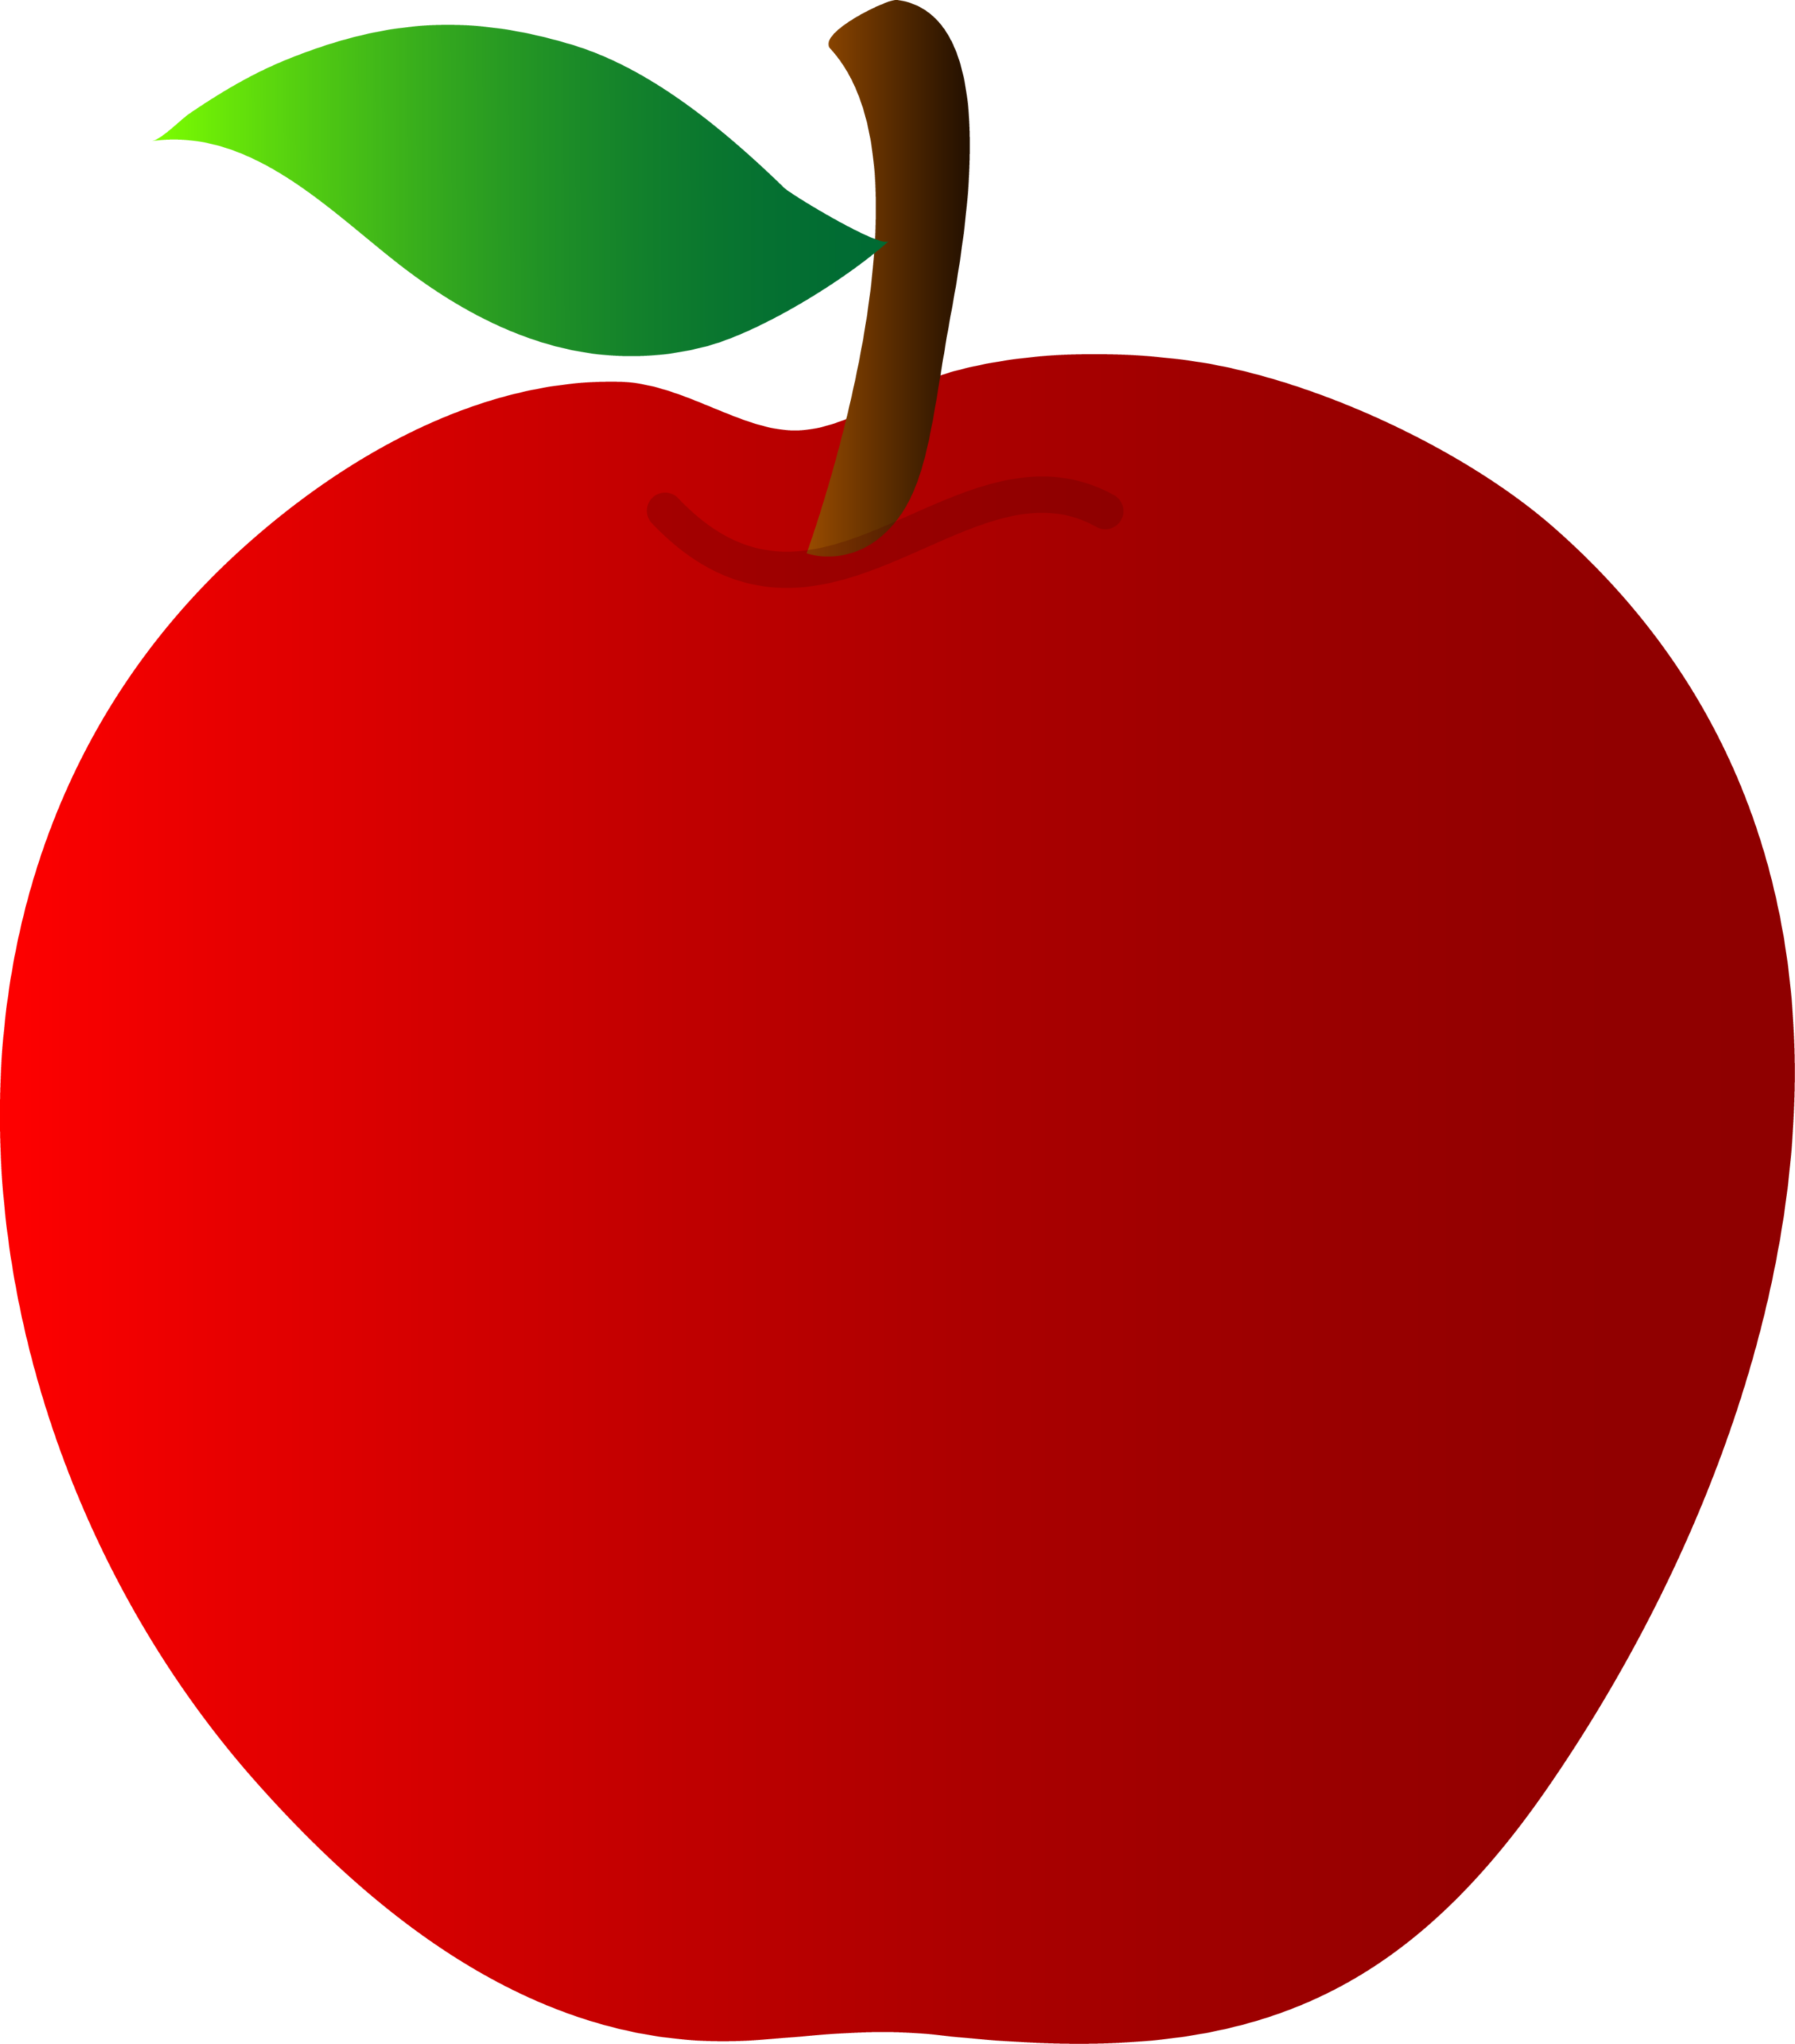 free clipart images for apple - photo #21